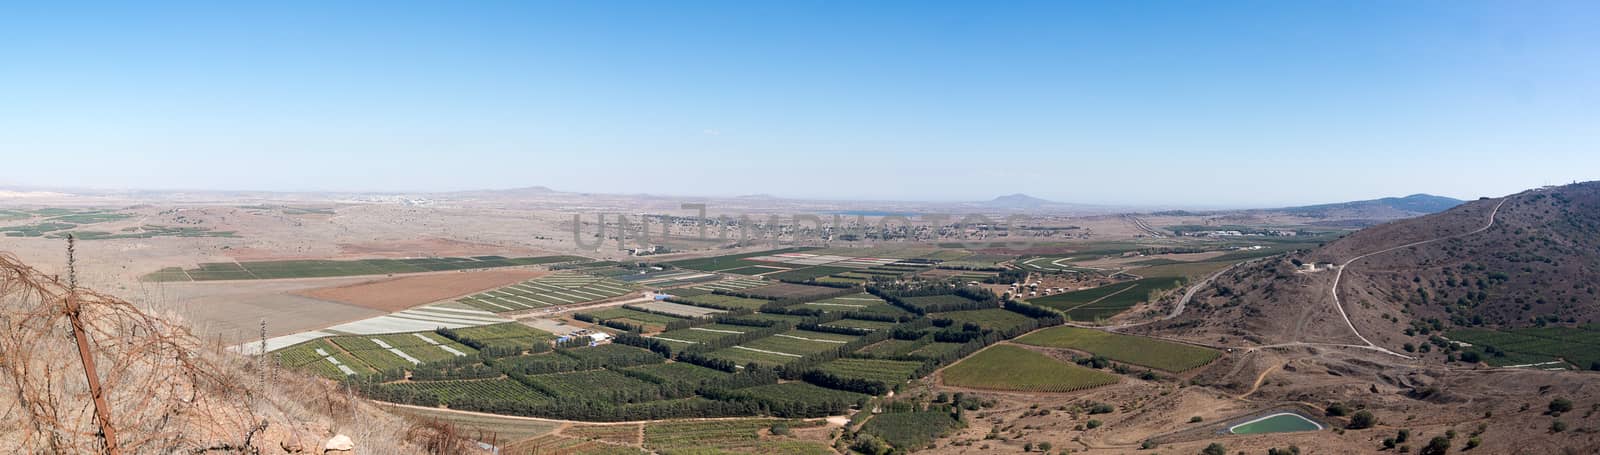 Israel and Syria panorama from Golan Heights by javax